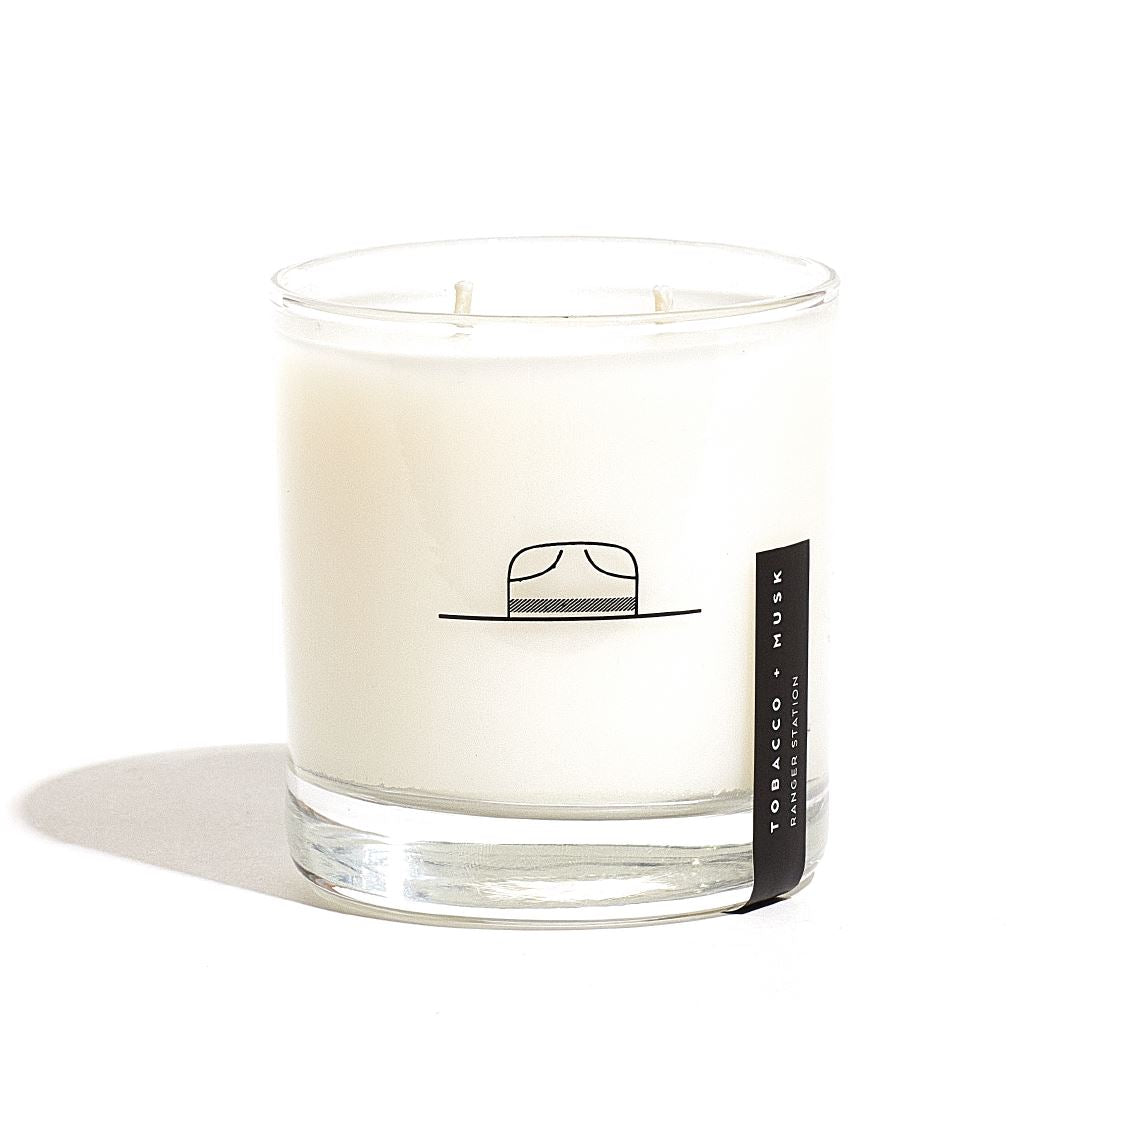 Ranger Station Candle - Tobacco + Musk